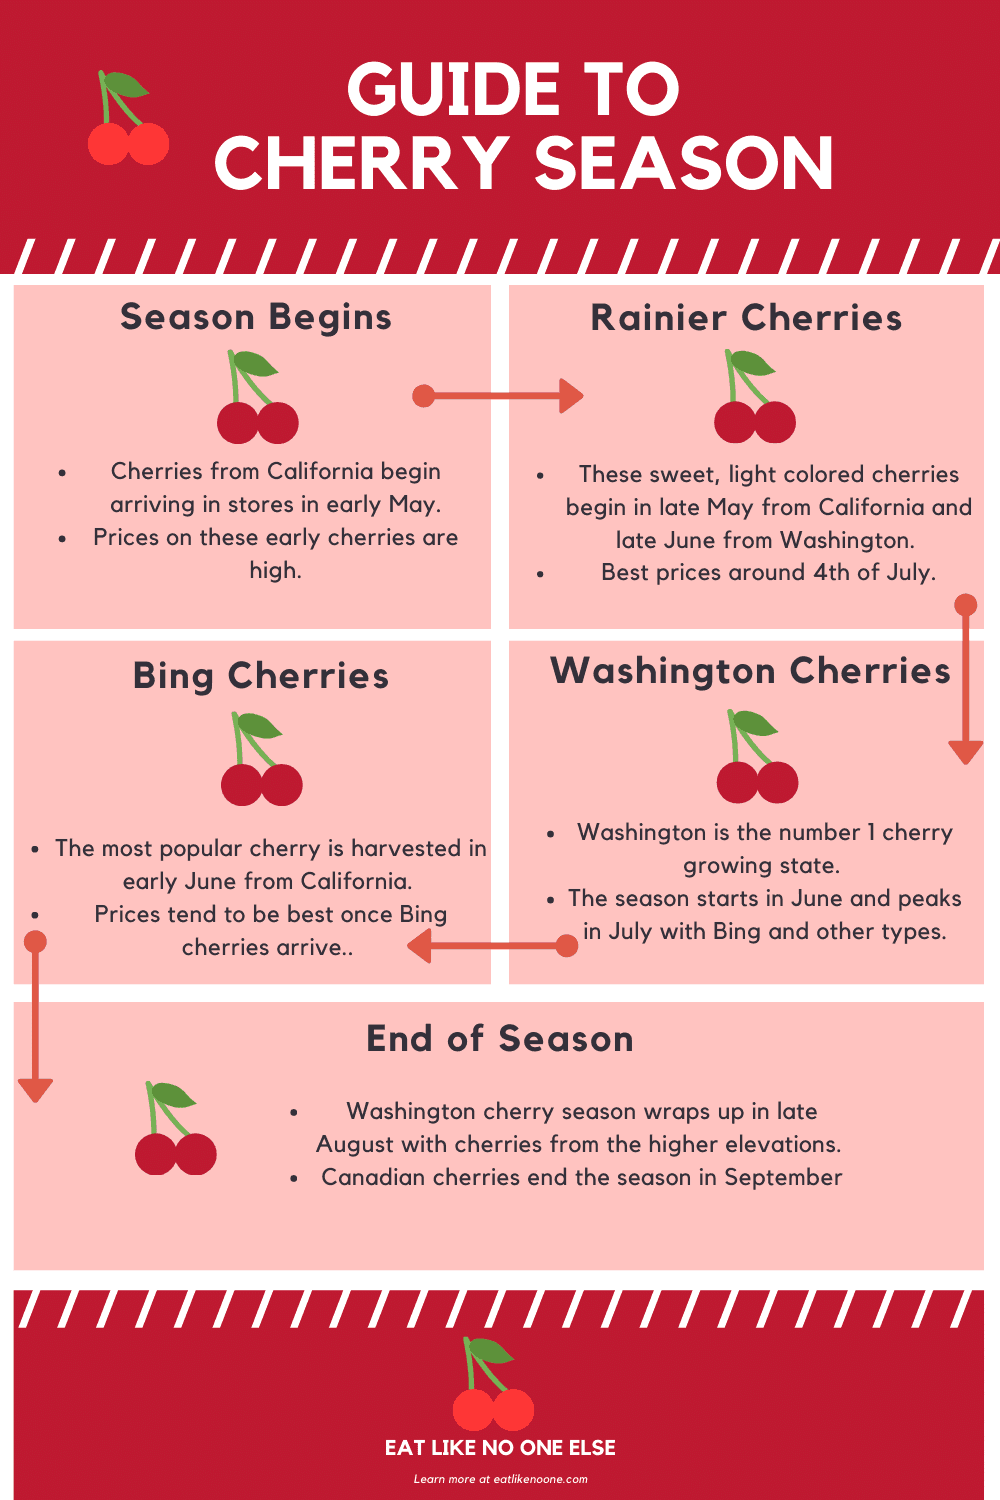 An infographic that goes through the cherry season from start to finish.